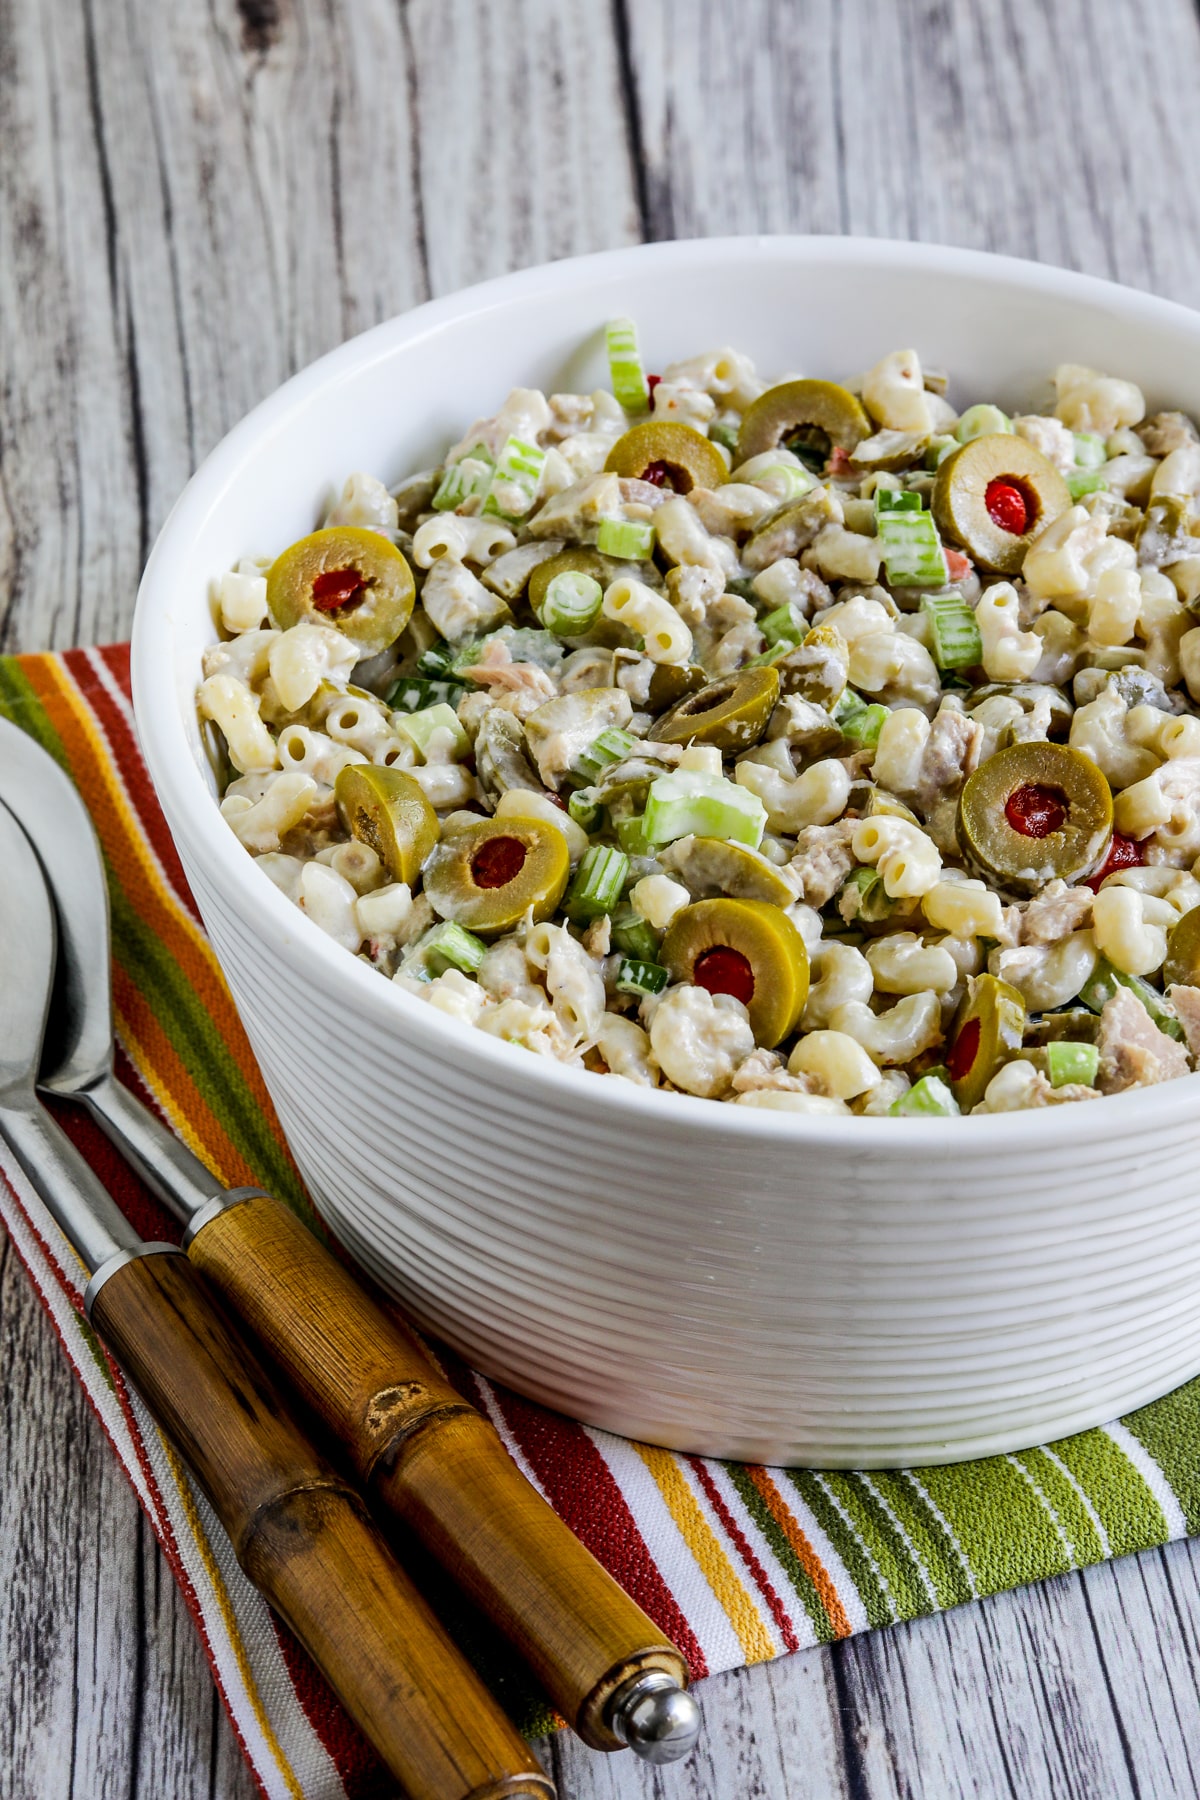 Tuna macaroni salad with green olives is shown in a bowl with a fork.